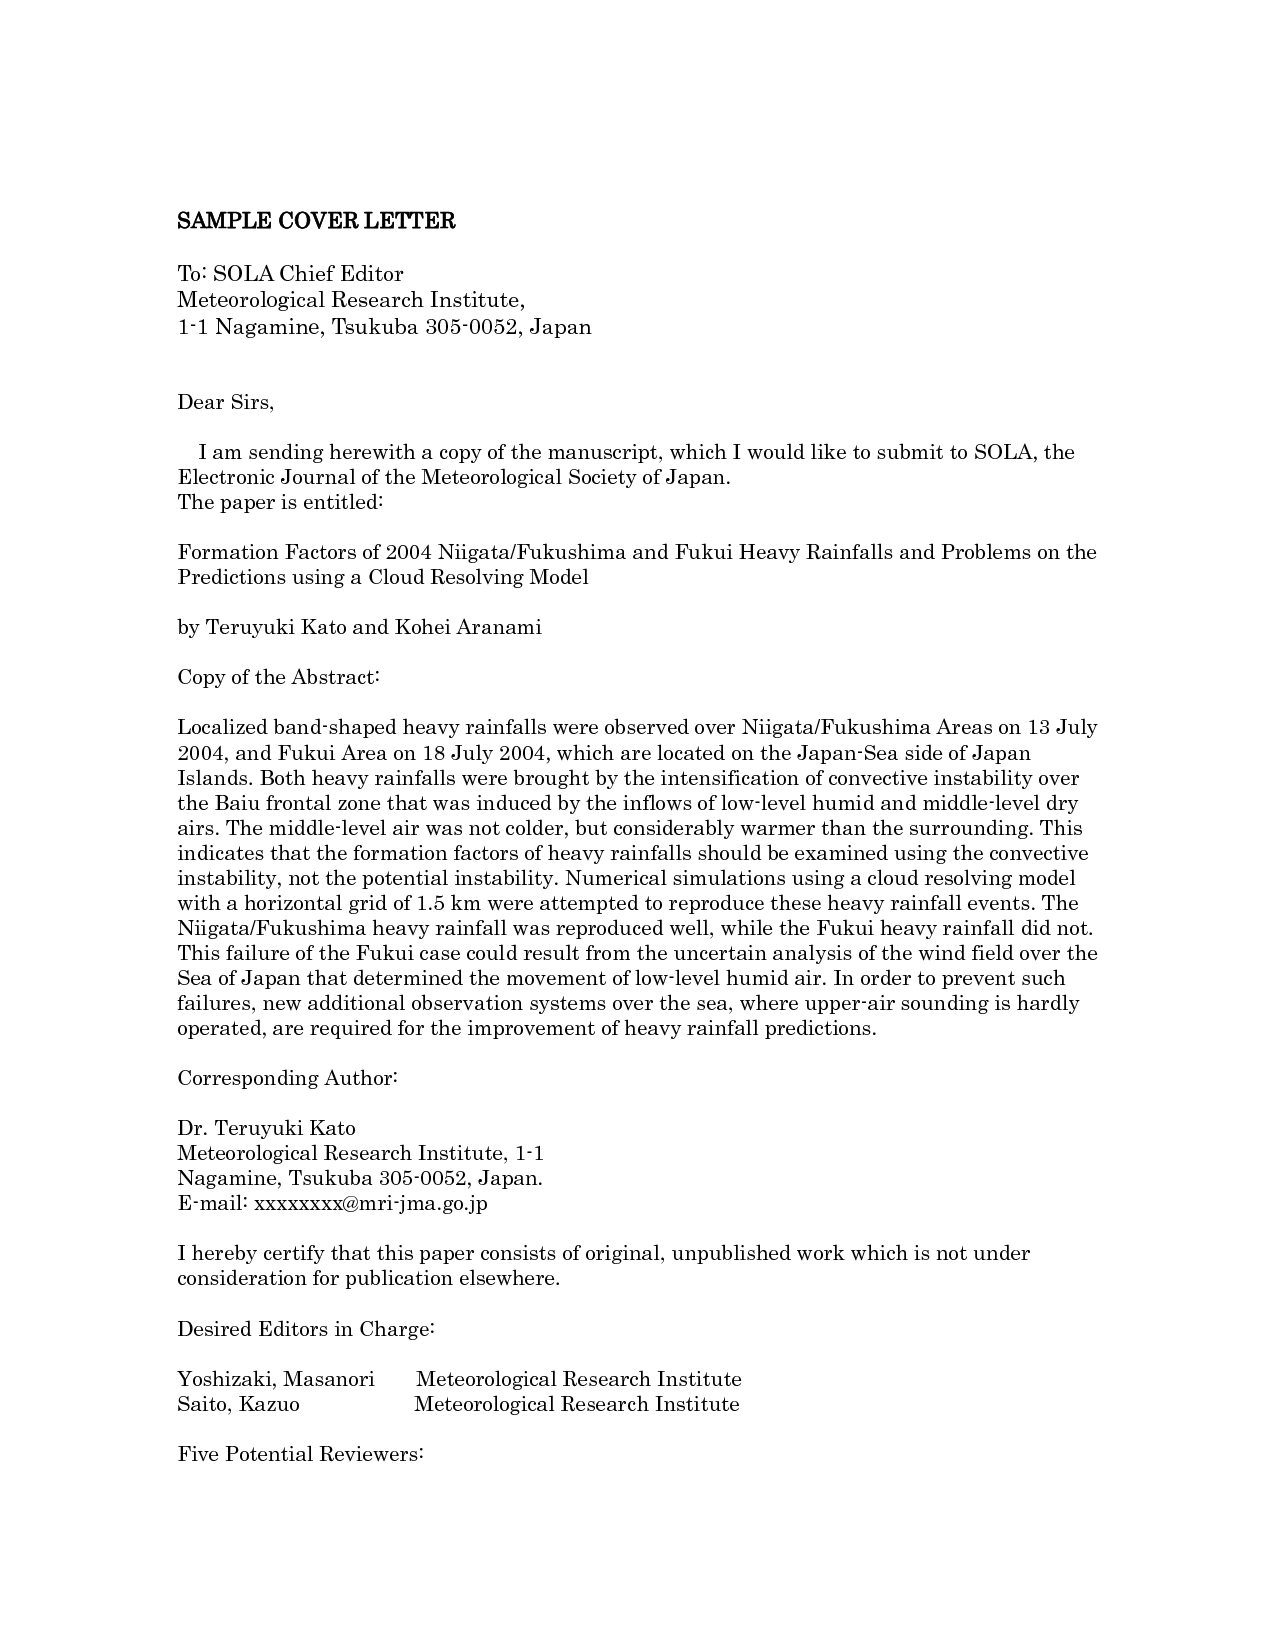 cover letter example for journal article submission